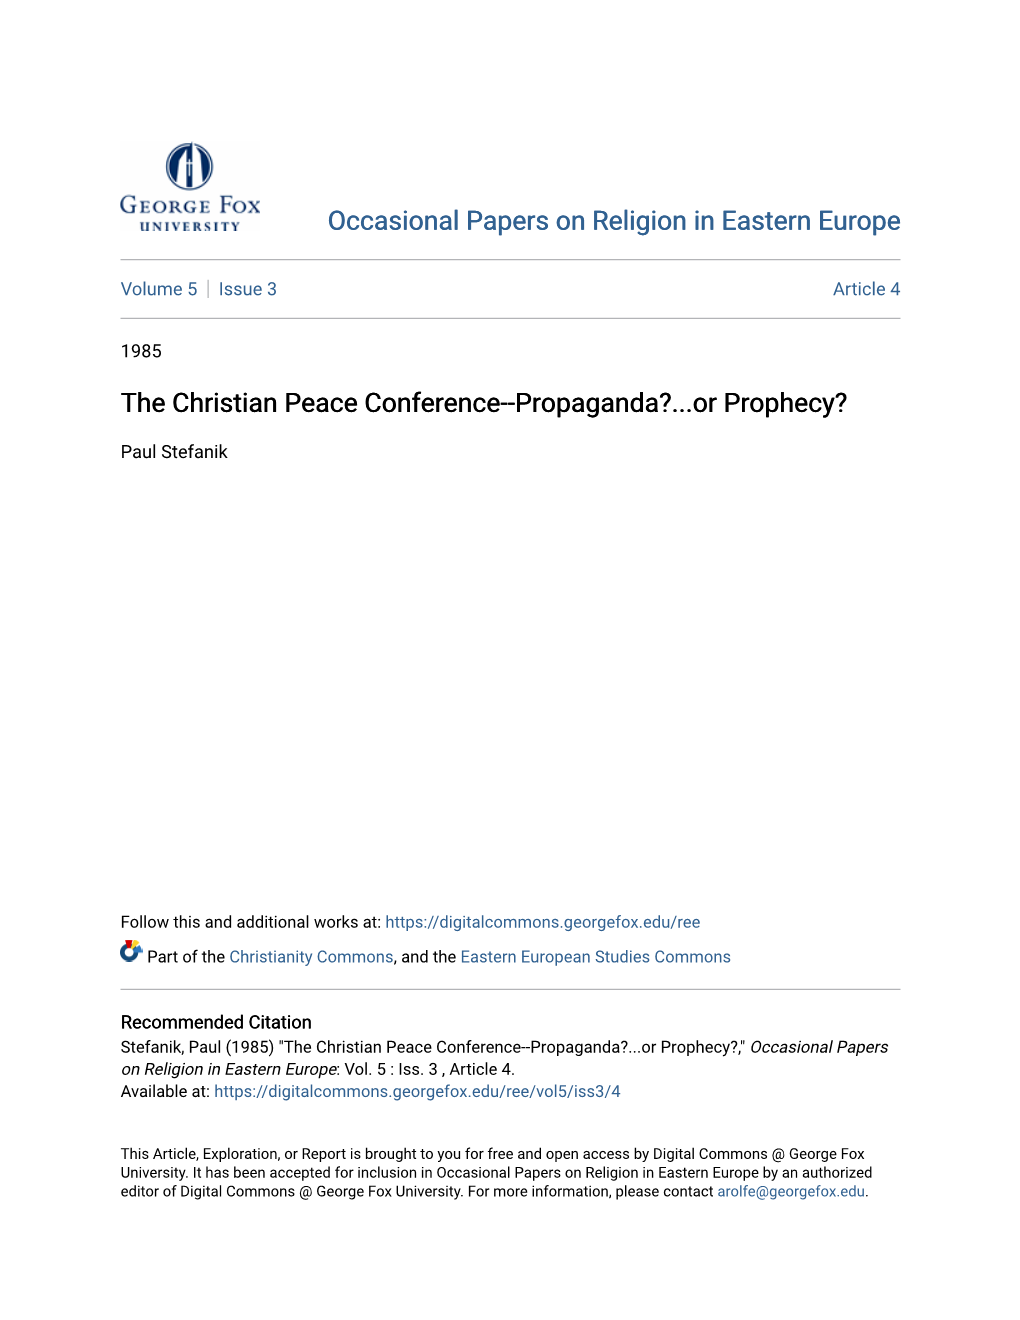 The Christian Peace Conference--Propaganda?...Or Prophecy?